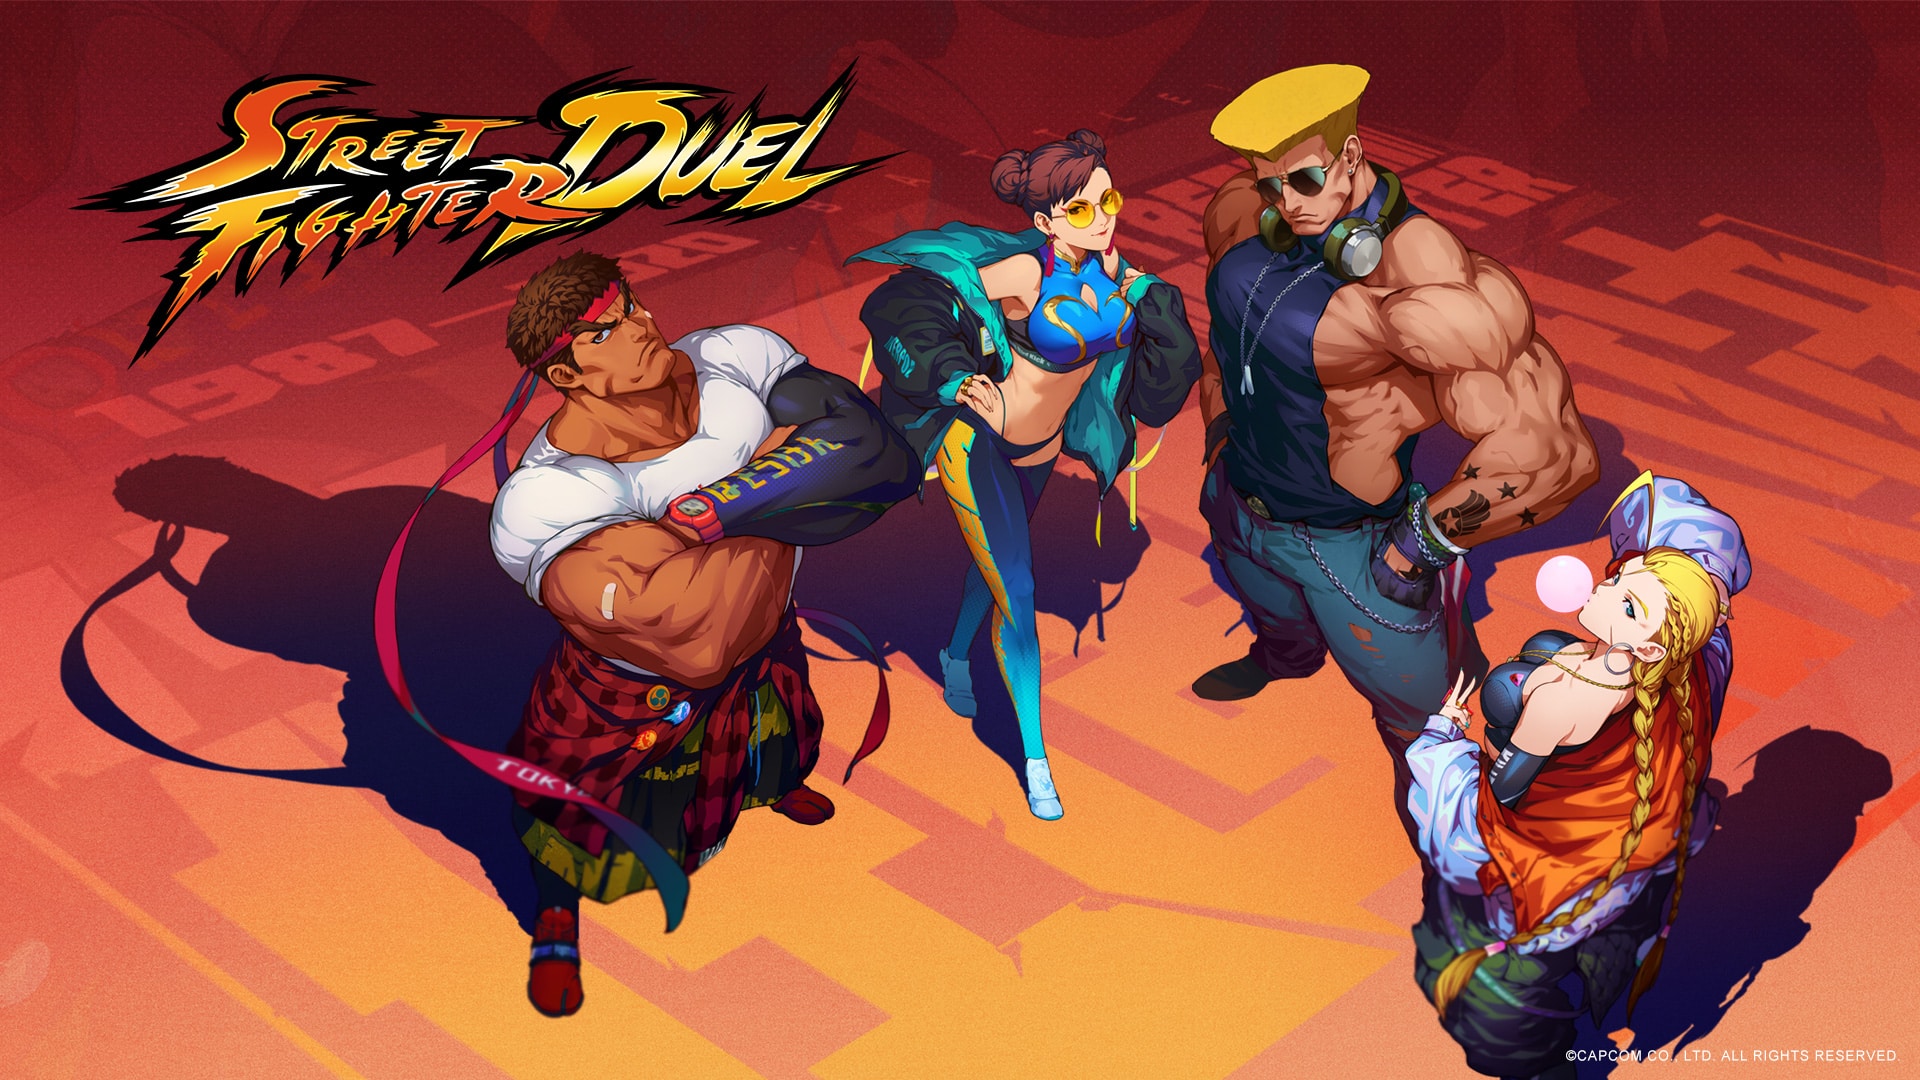 Street Fighter: Duel Guide